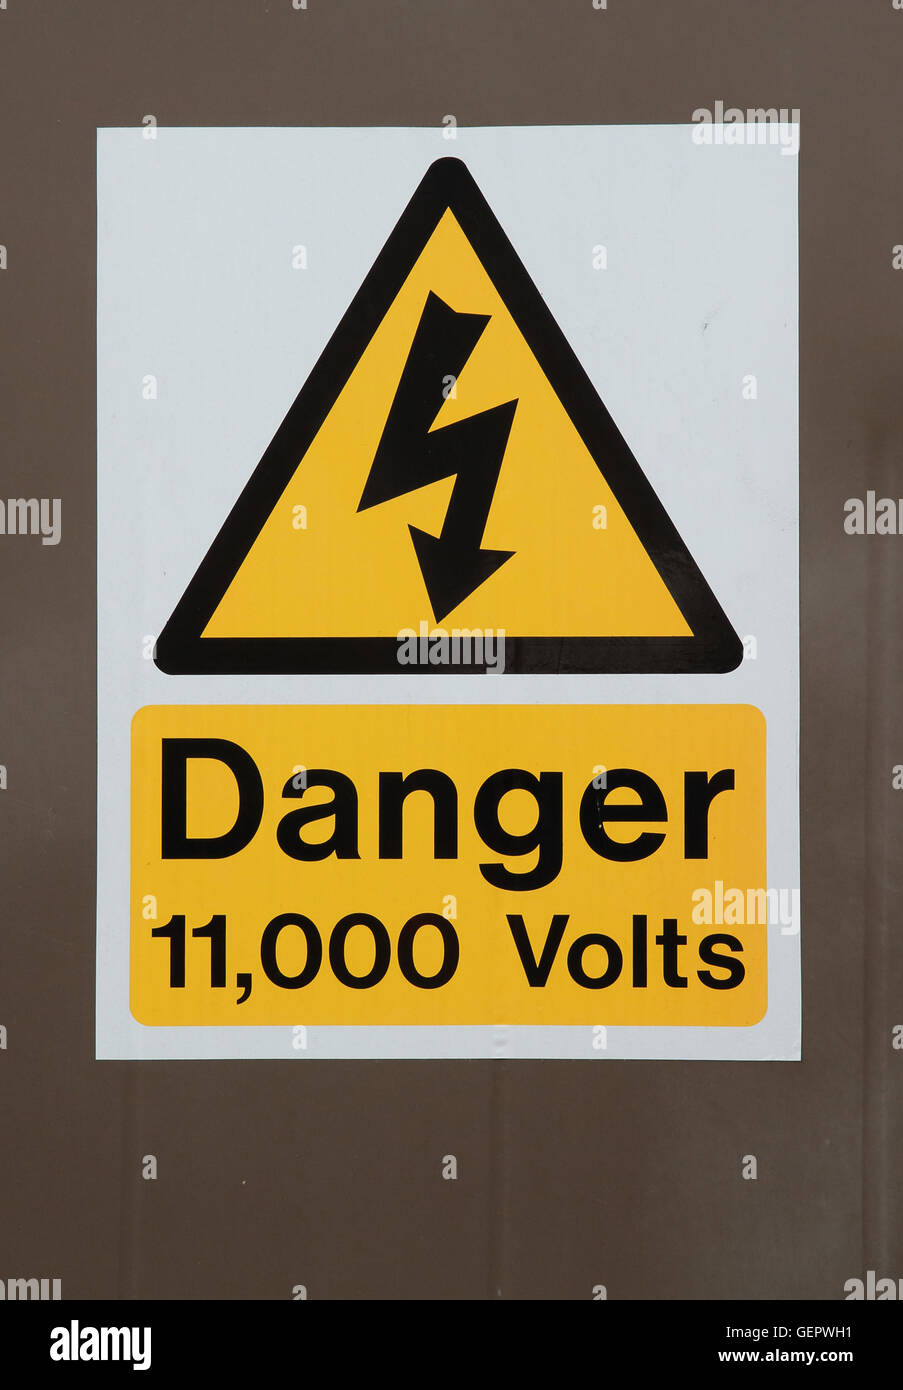 A warning sign for danger, from high electric current. Stock Photo